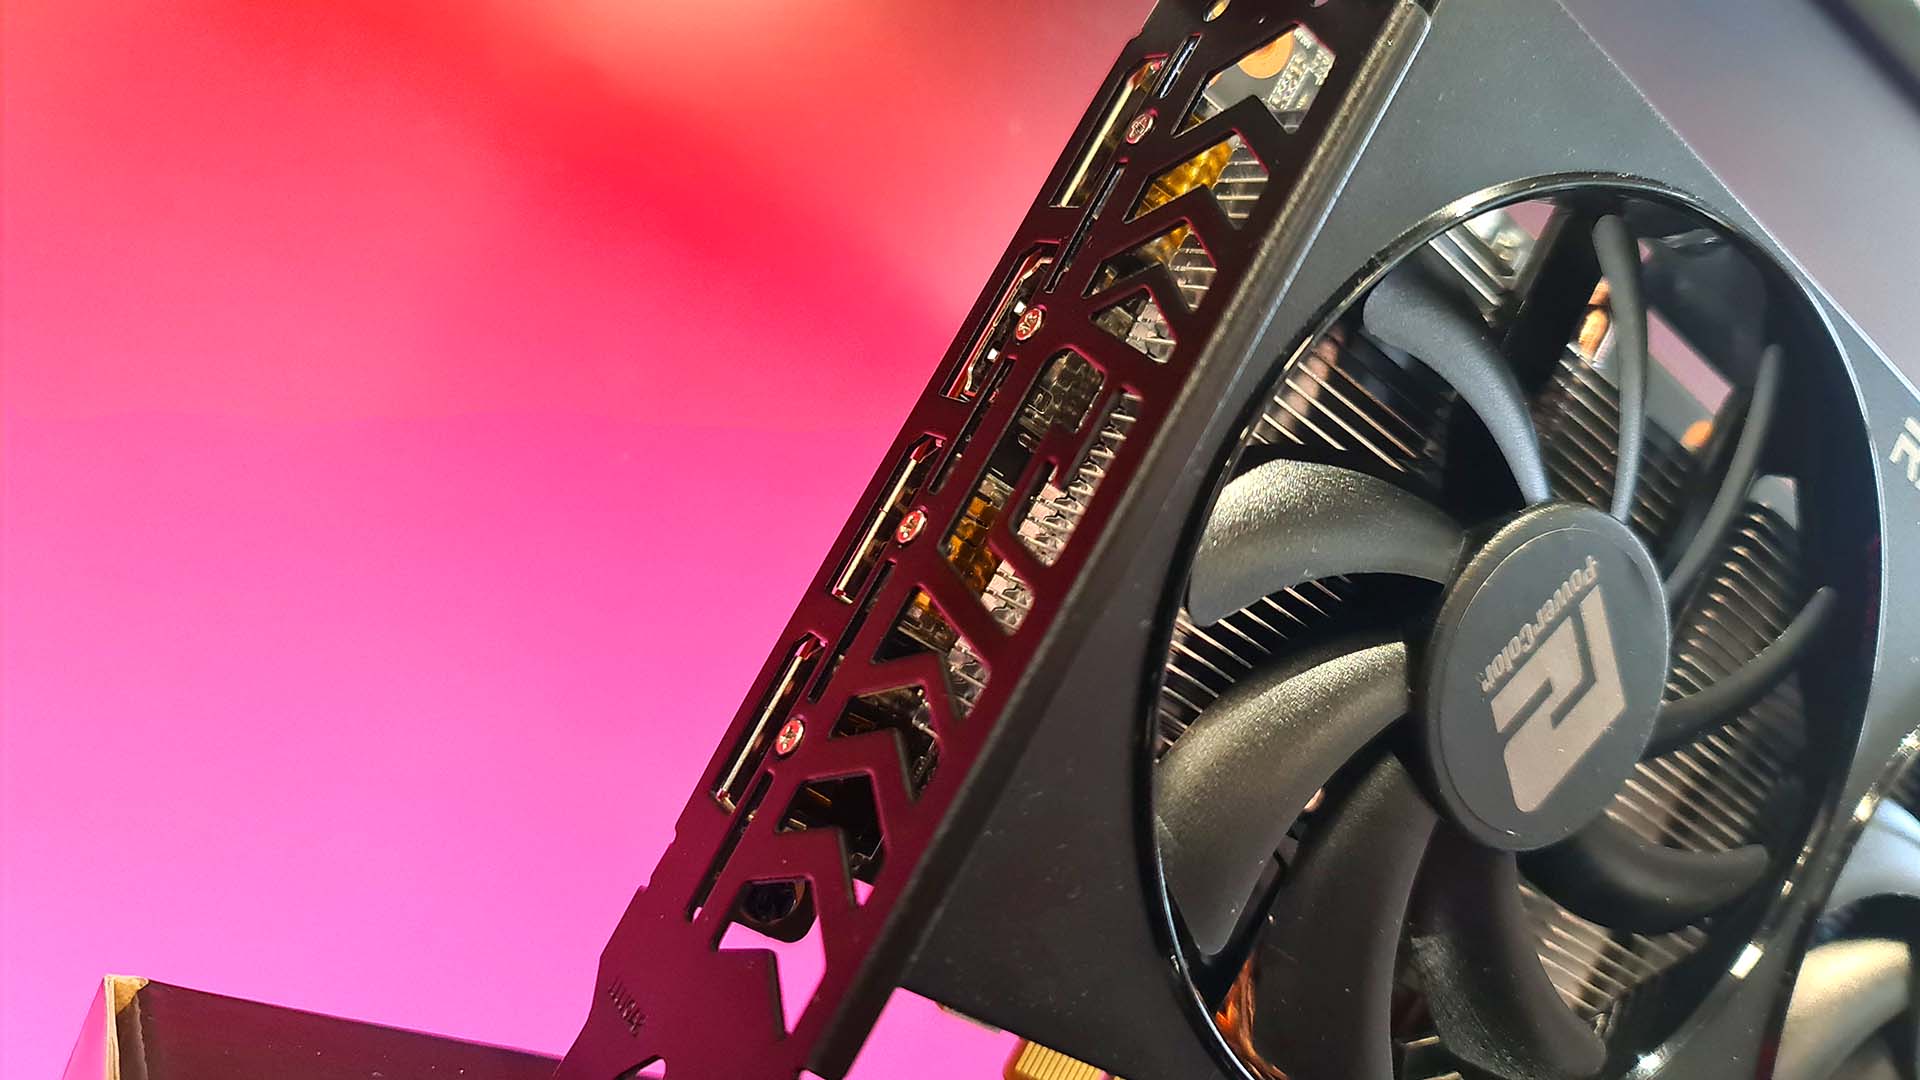 AMD Radeon RX 6600 graphics card on colored background.